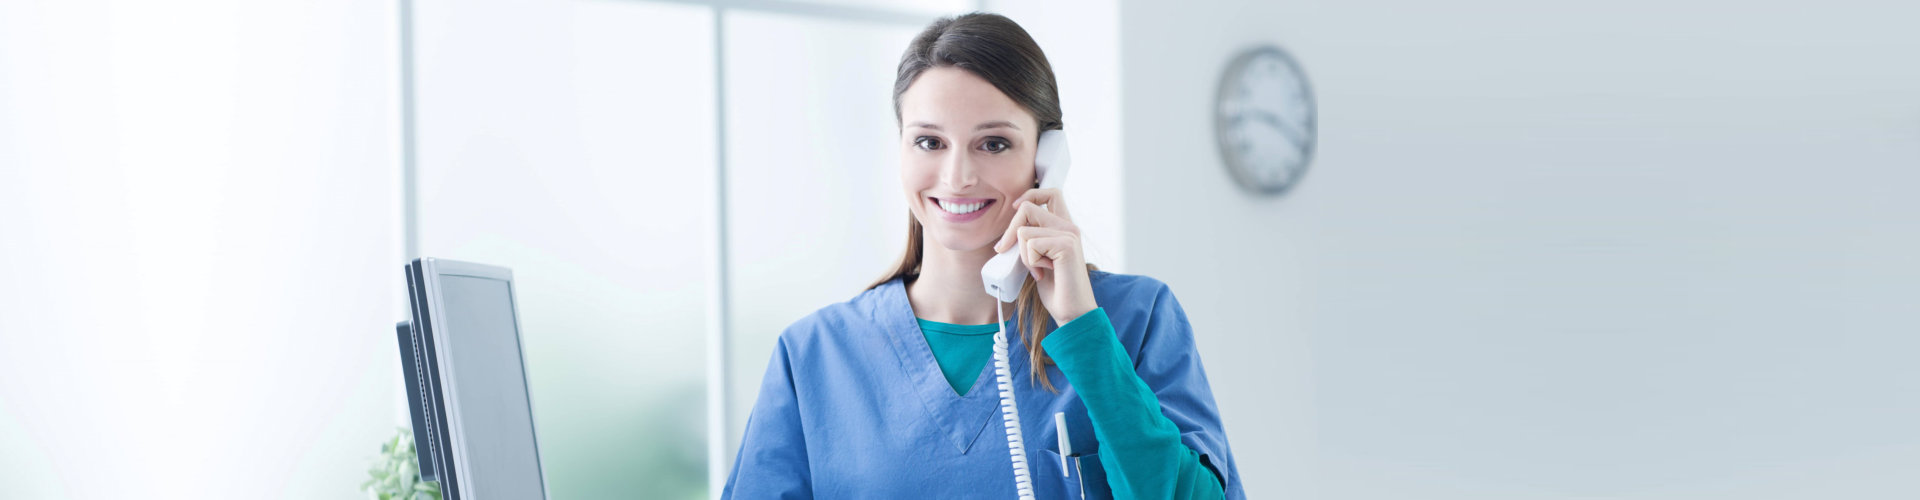 young female caregiver answering phone calls